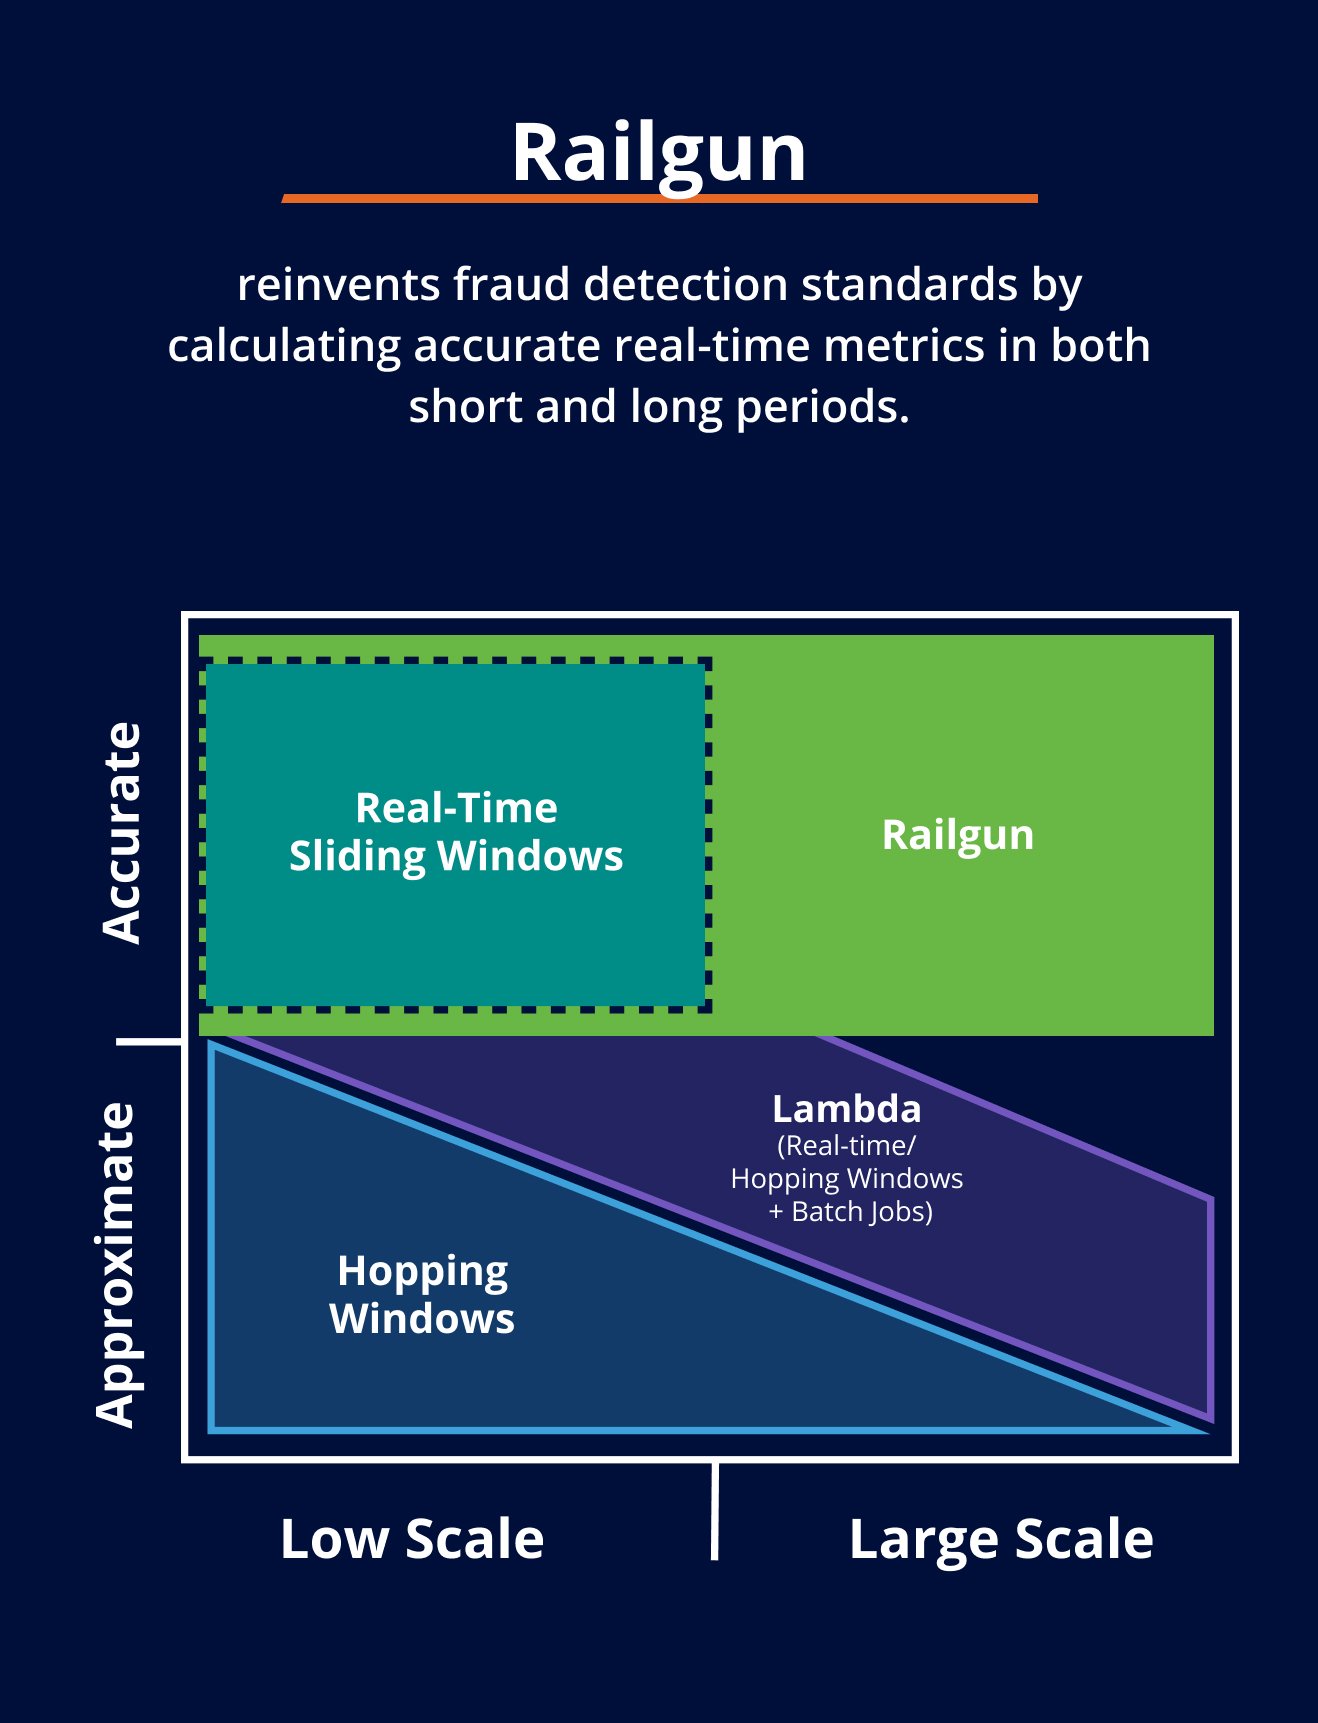 Diagram explaining how Feedzai's Railgun reinvents fraud detection by both calculating accurate real-time metrics in both short and long periods.